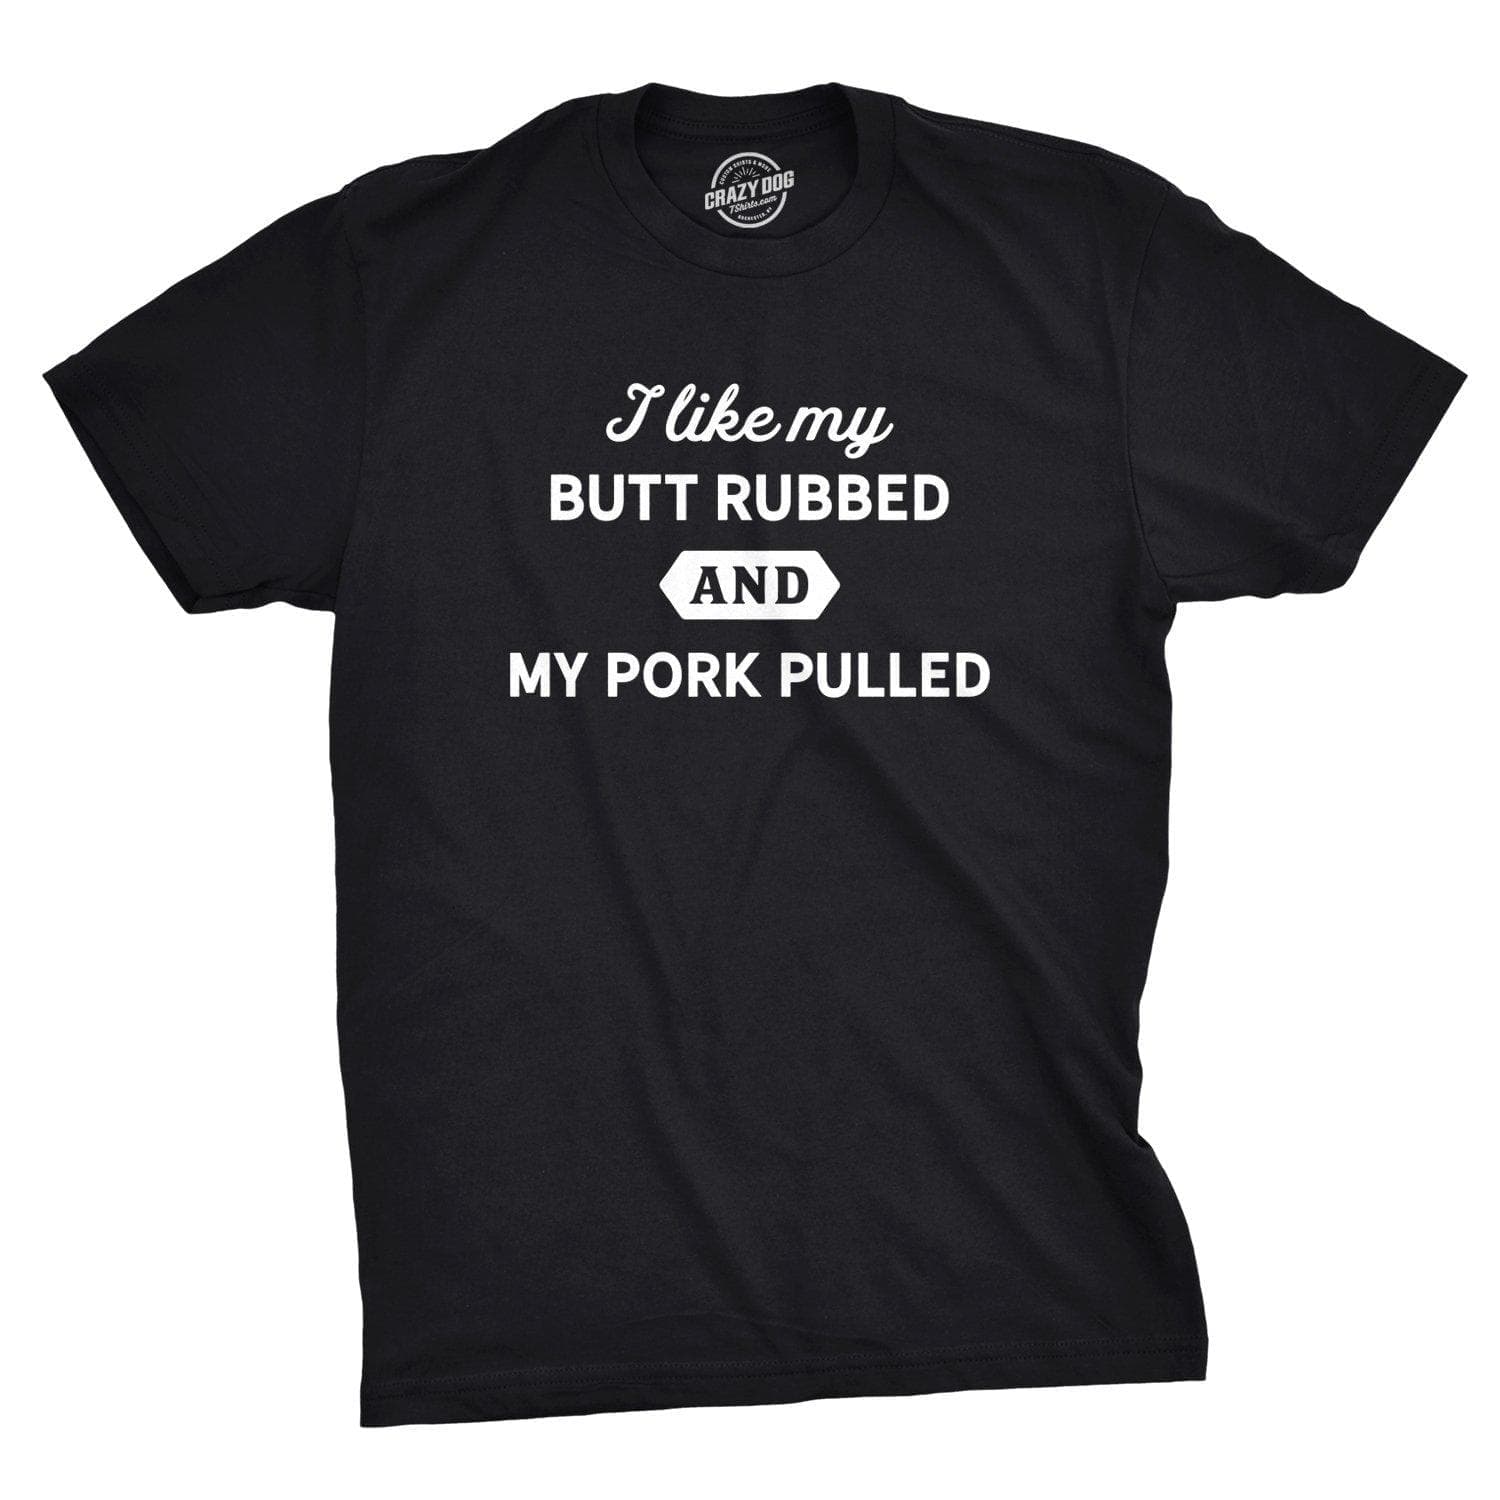 I Like My Butt Rubbed And My Pork Pulled Men's Tshirt  -  Crazy Dog T-Shirts